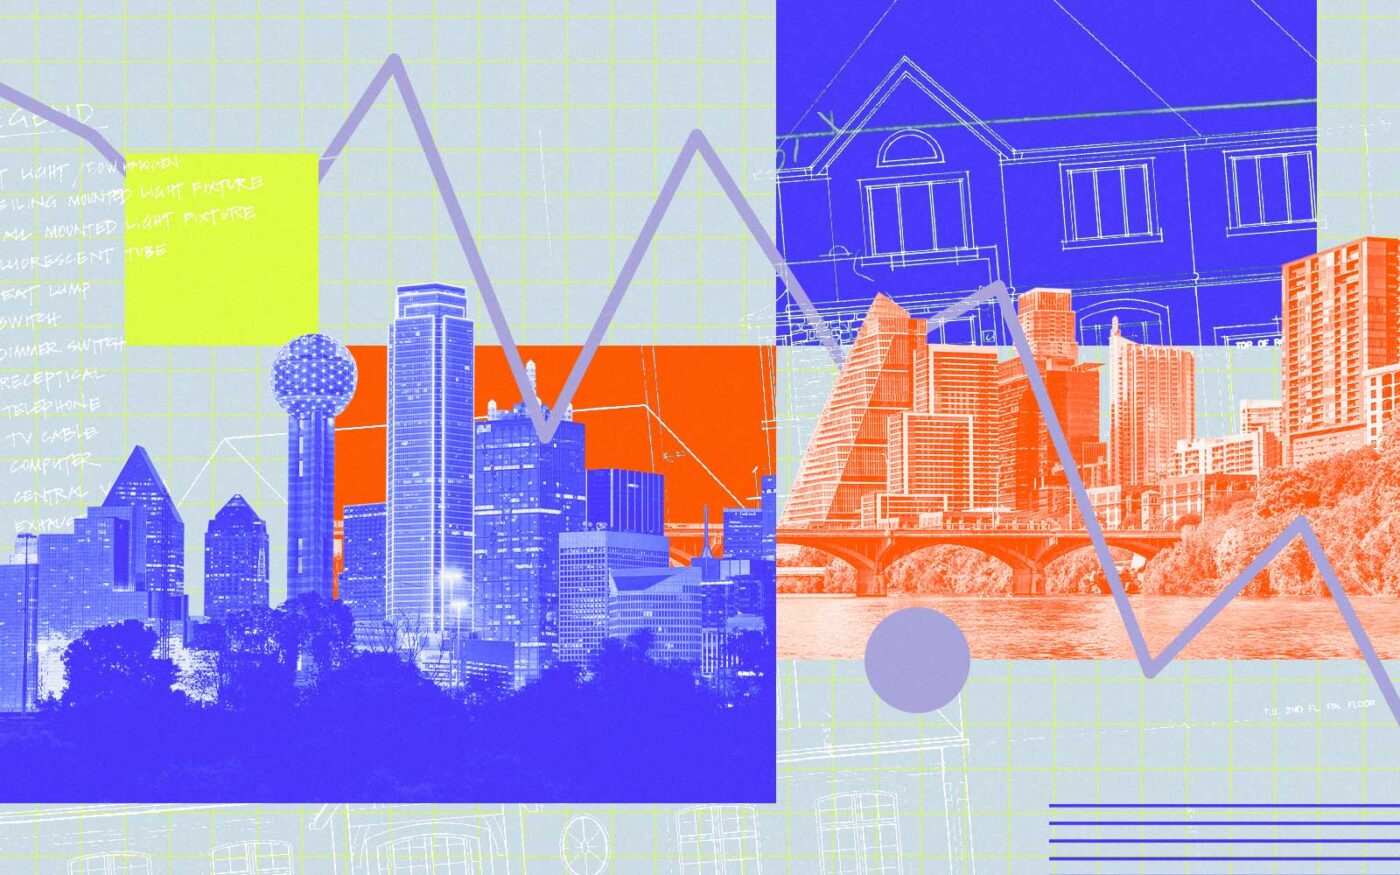 Home prices are falling in Austin and DFW